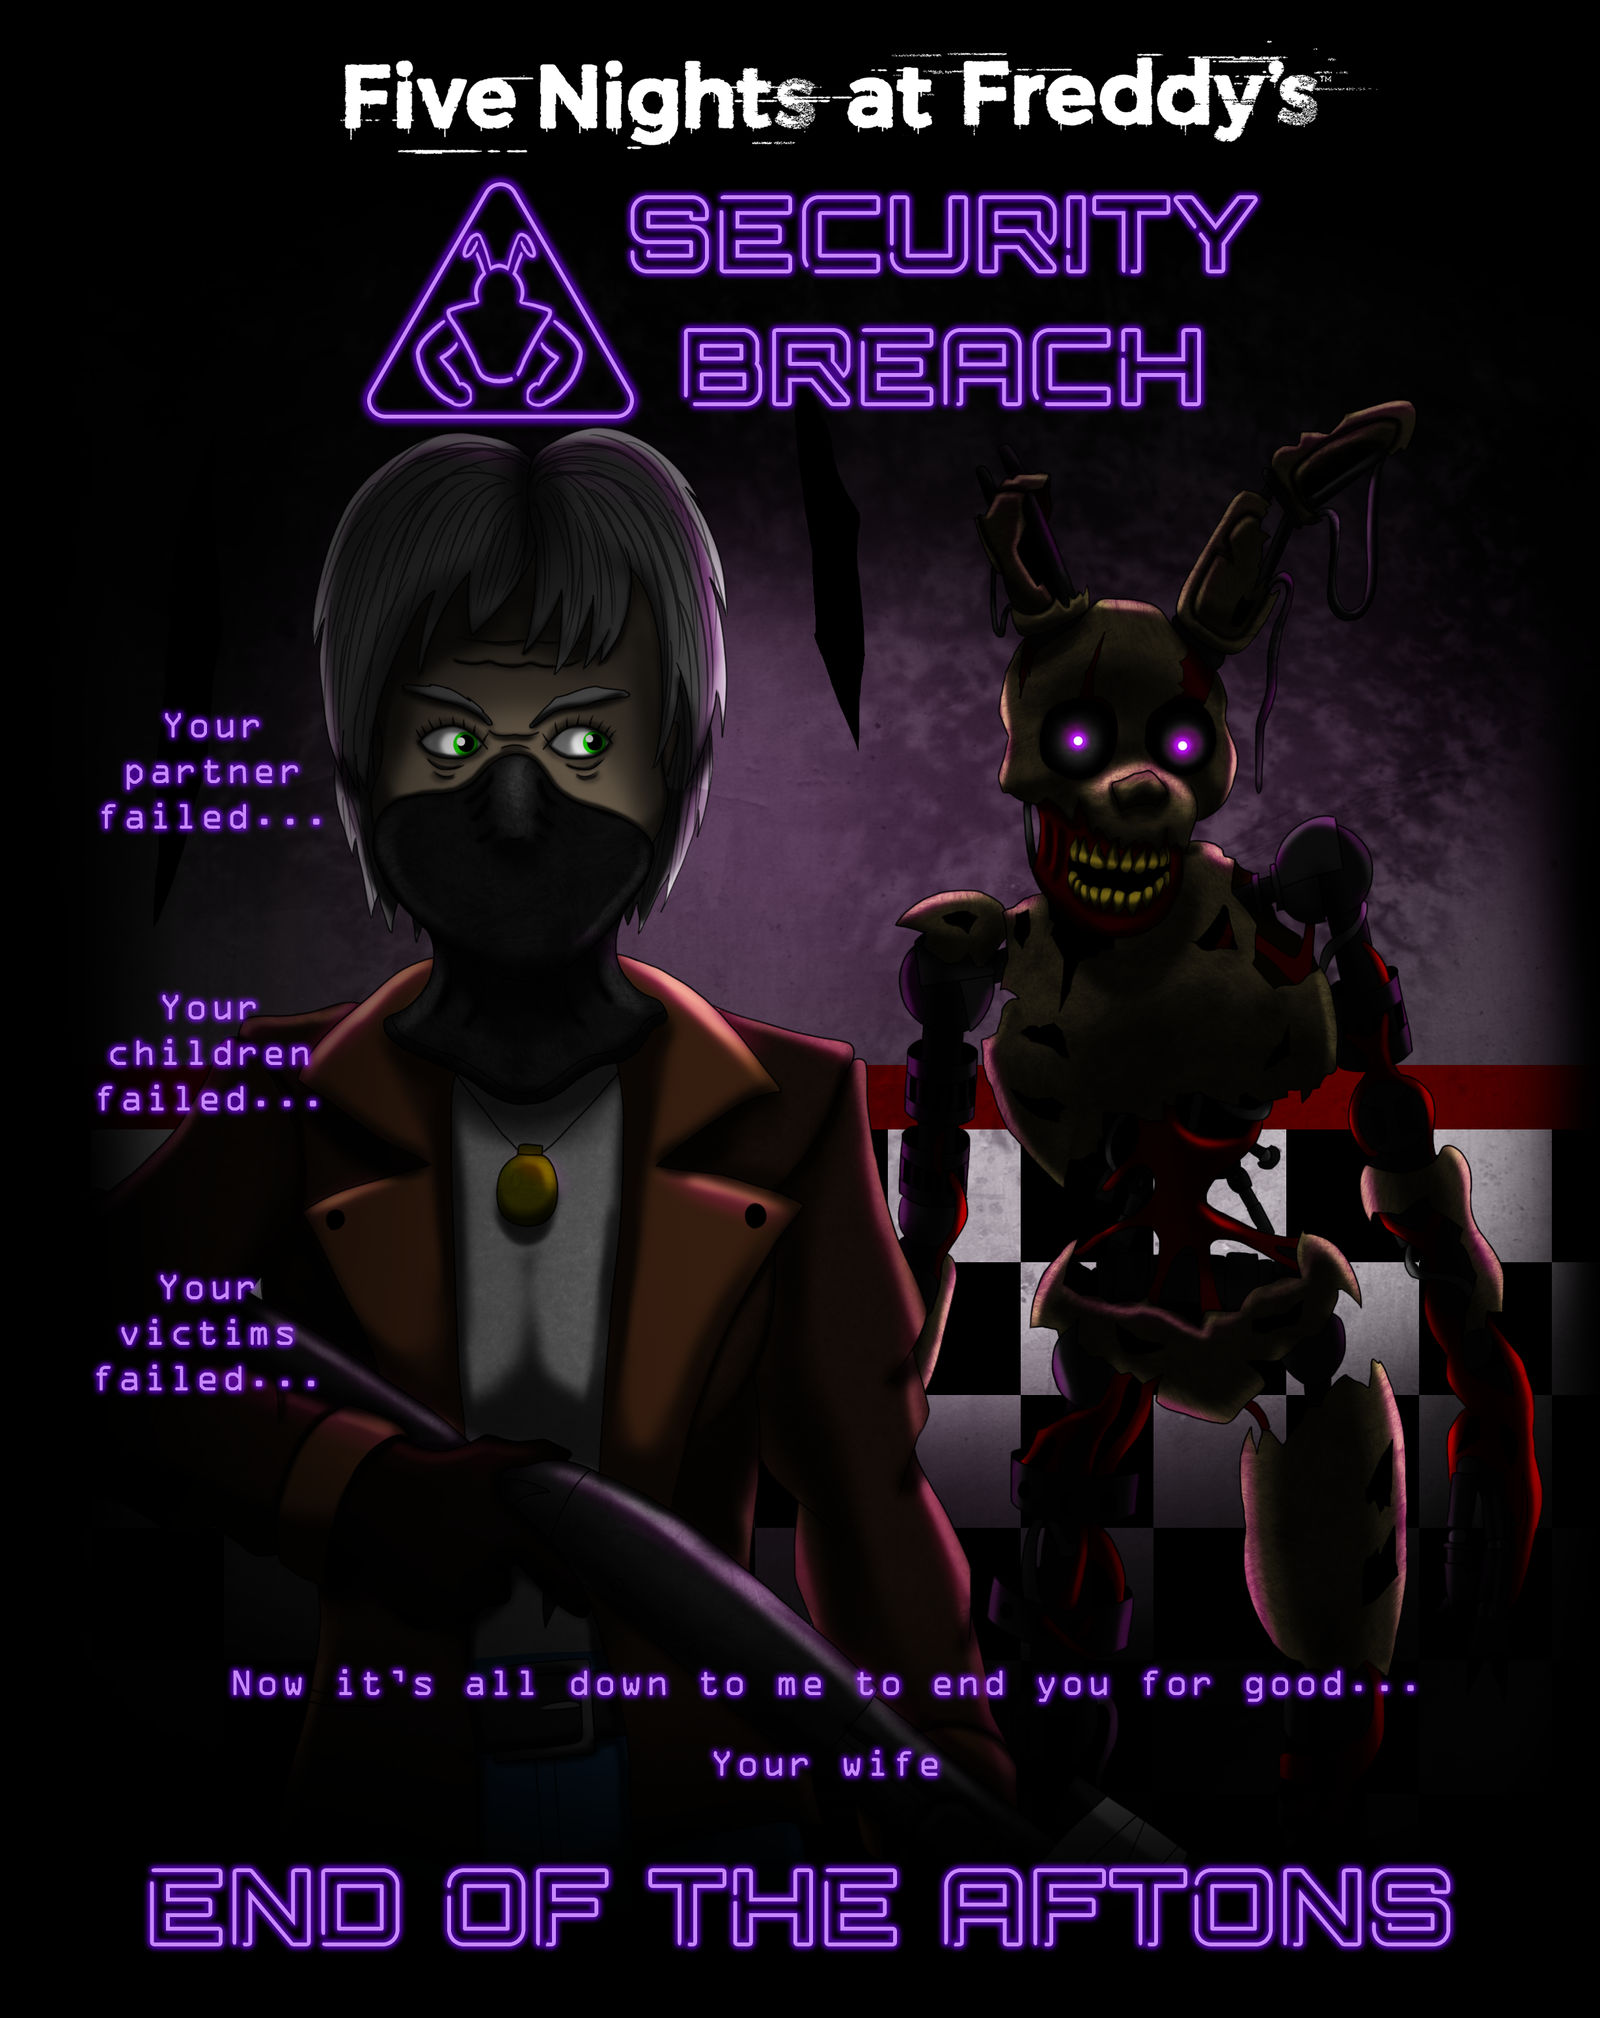 How to download the five nights at Freddy's security breach on PS